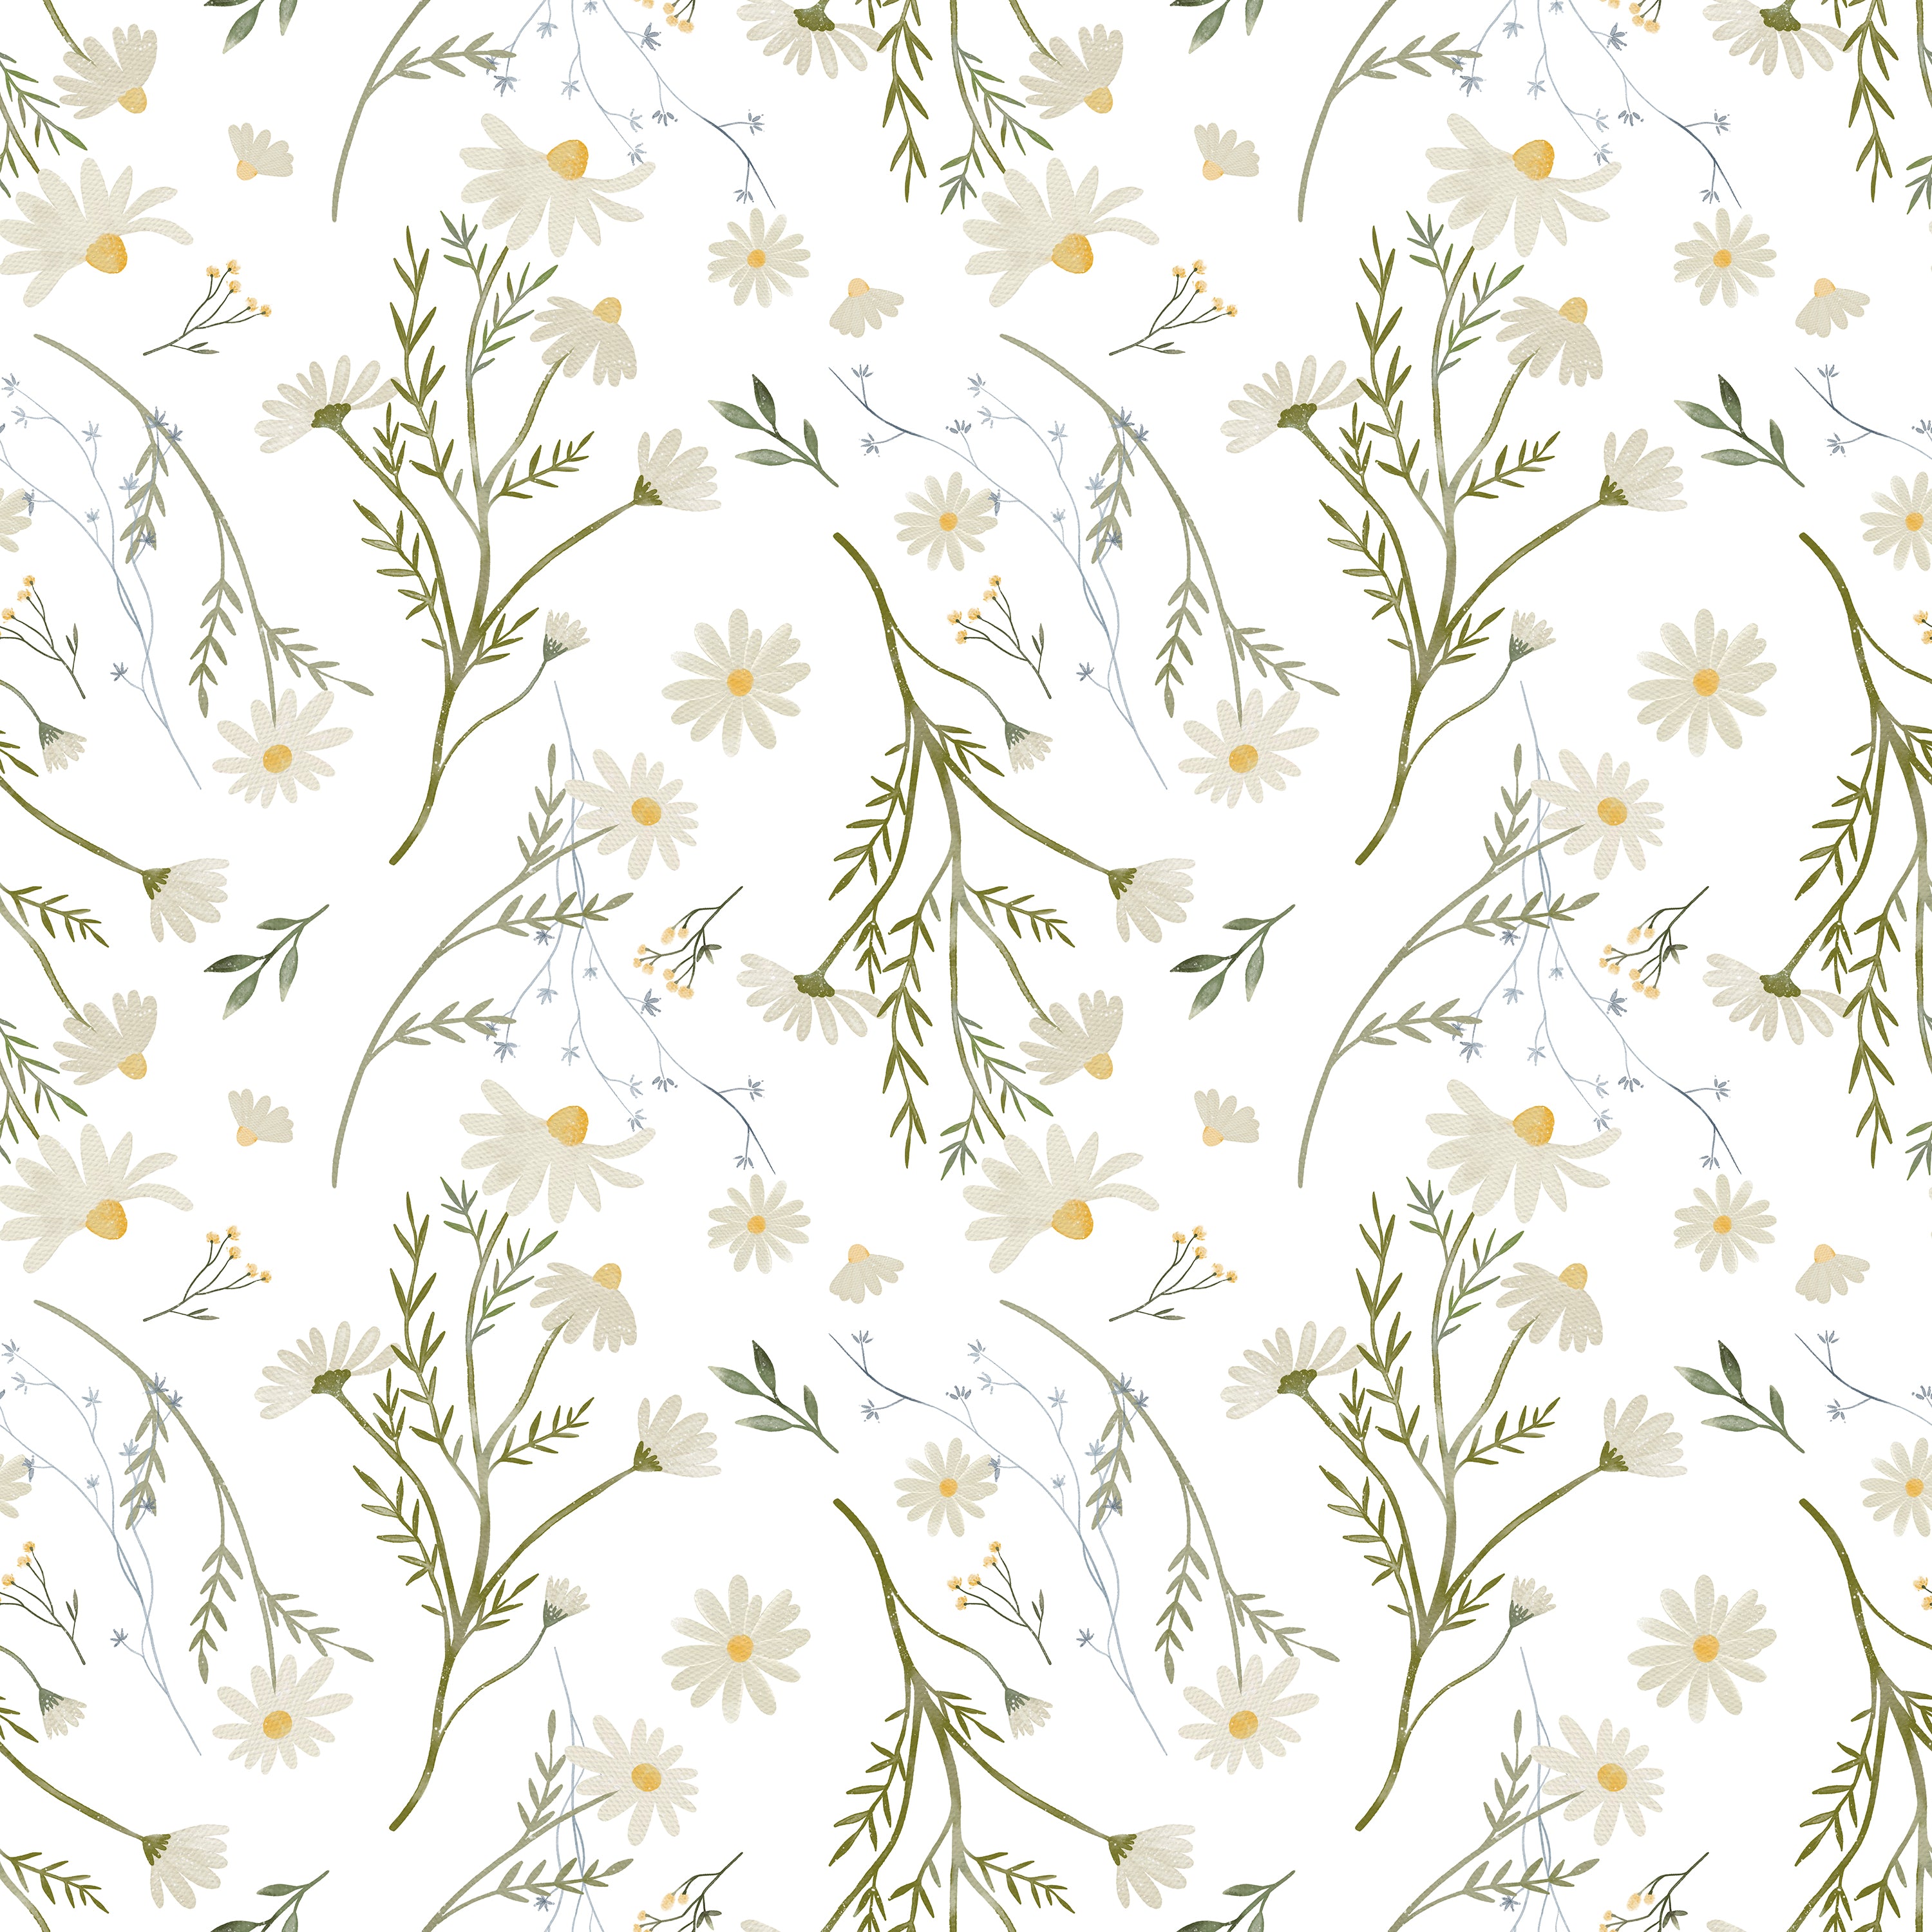 A close-up view of Daisy Bouquet Wallpaper displaying a repeating pattern of hand-painted wild daisies with yellow centers and green stems, intermingled with subtle blue accents, on an off-white background, conveying a tranquil and natural atmosphere